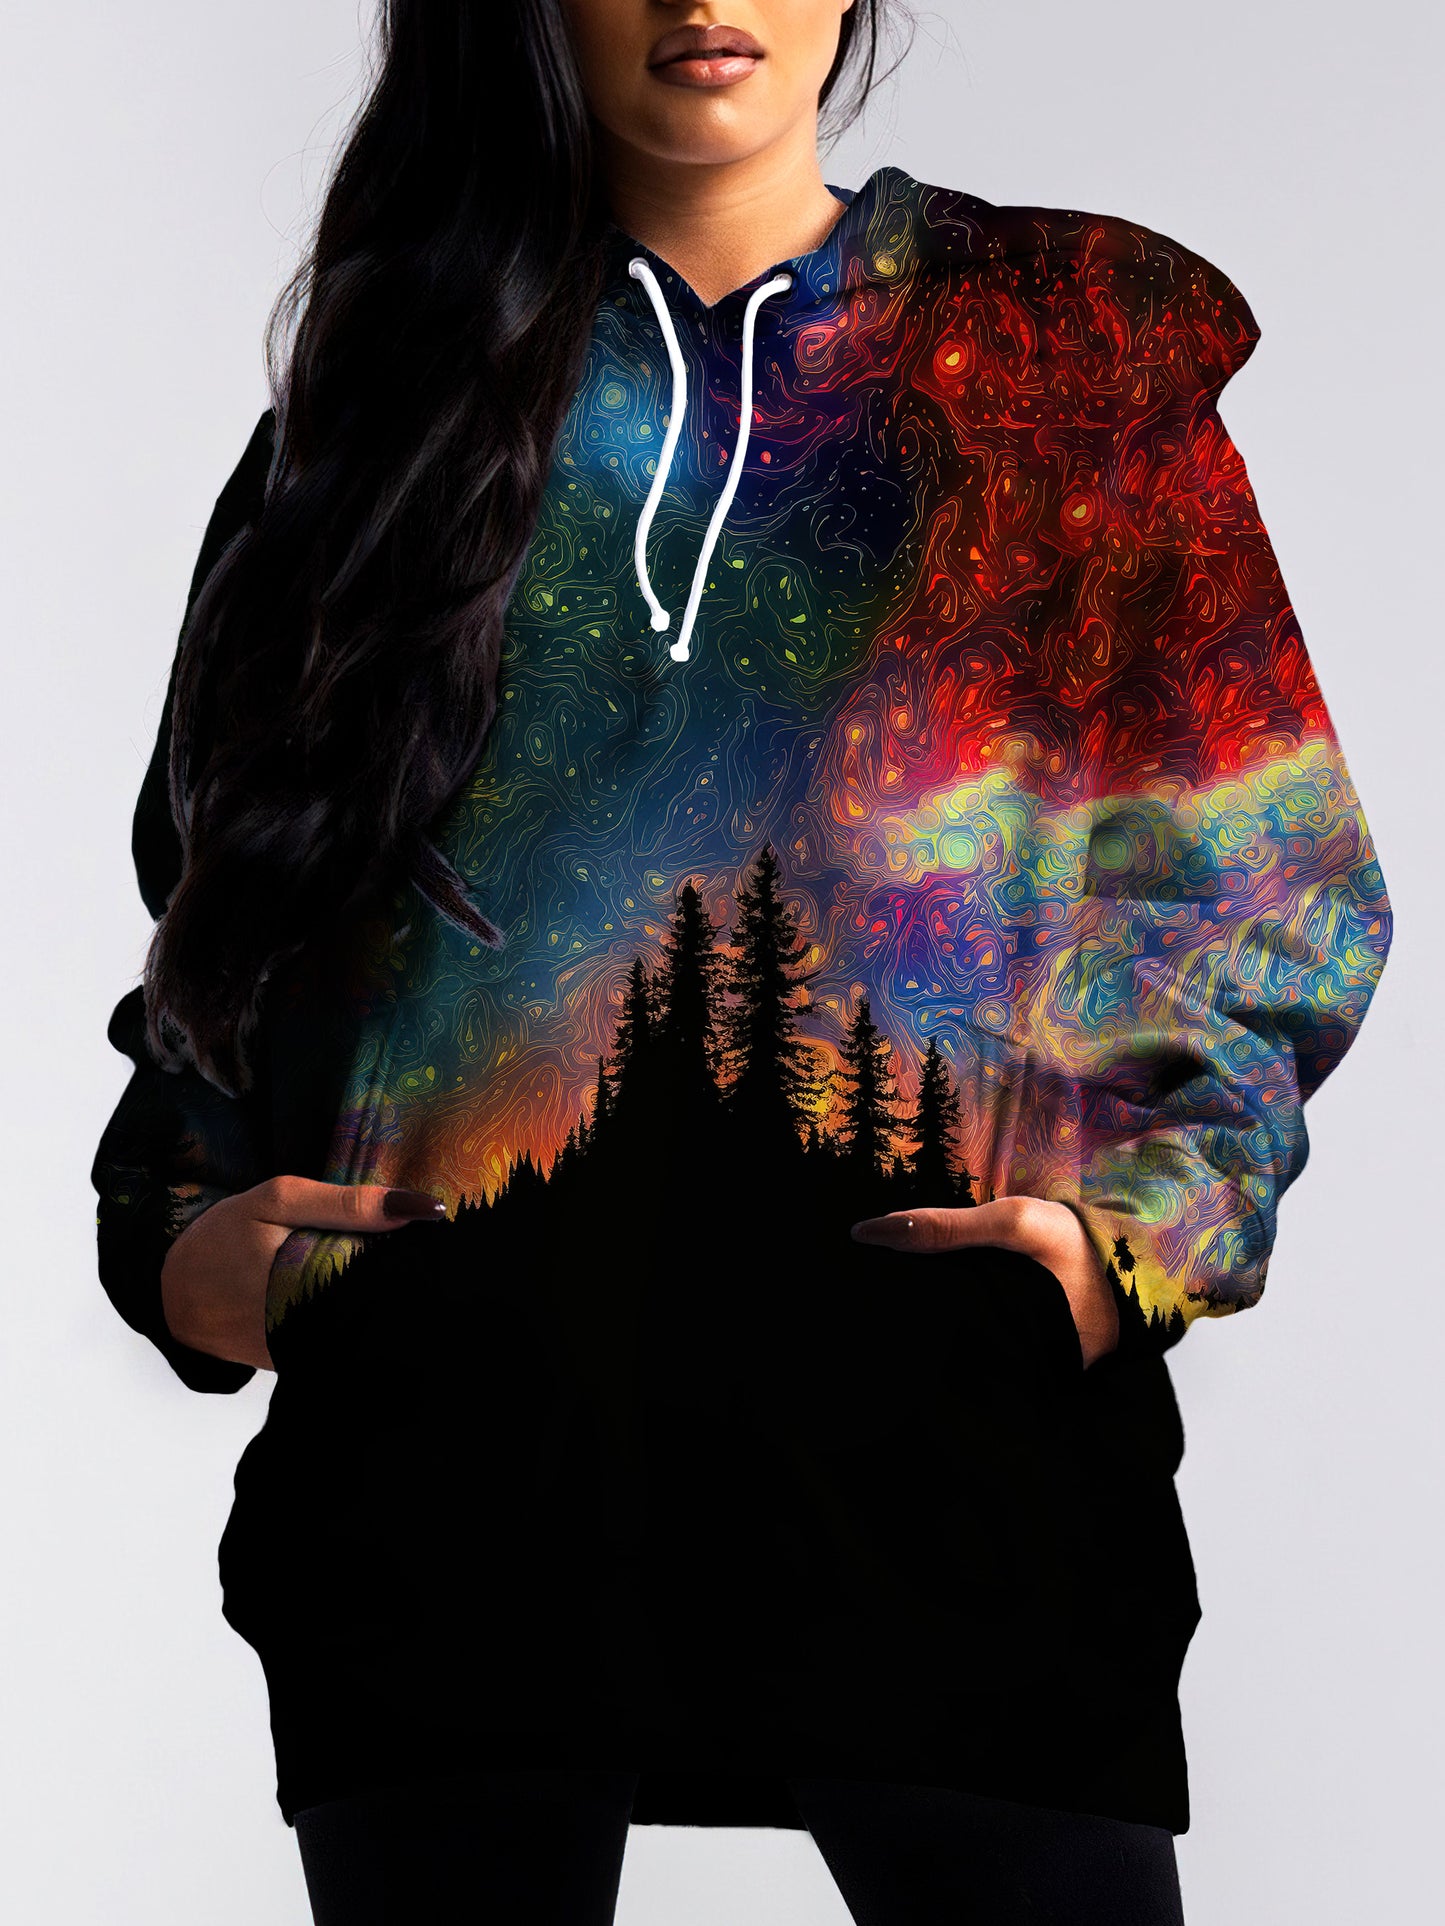 Get lost in the mesmerizing patterns and colors of this trippy pullover hoodie